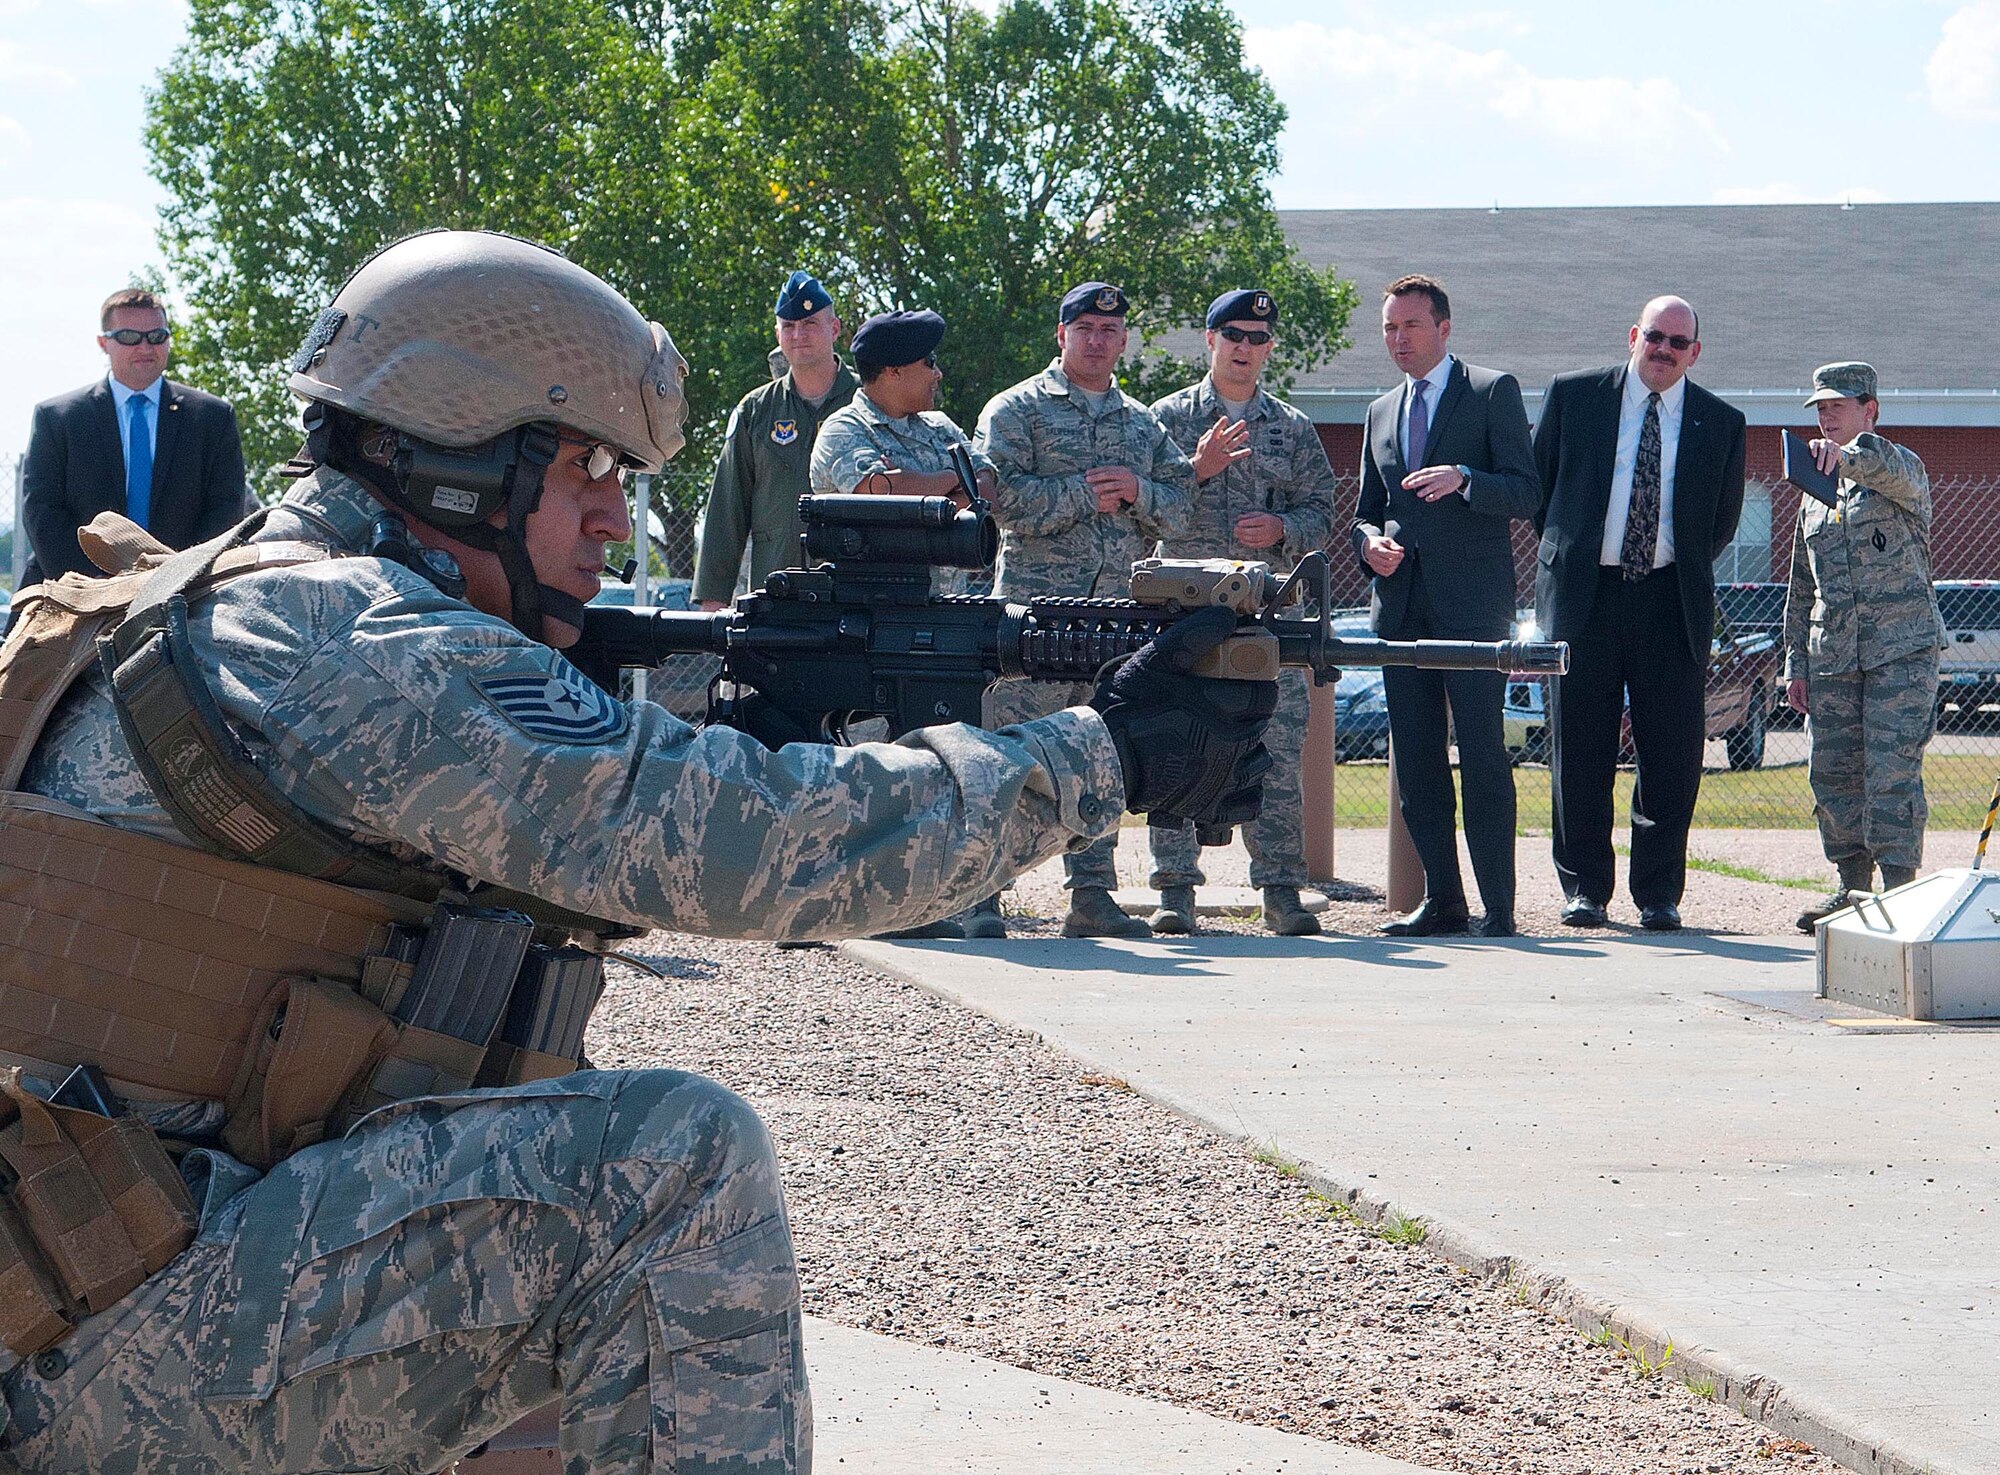 Acting Secretary of the Air Force Eric Fanning (third from right) watches Tech. Sgt. Bobby DeLeon demonstrate the 90th Security Group Tactical Response Force team’s capability during a visit to the 90th Missile Wing’s training launch facility August 15, 2013, at F.E. Warren Air Force Base. Fanning visited the base as part of a familiarization tour around Air Force installations.  